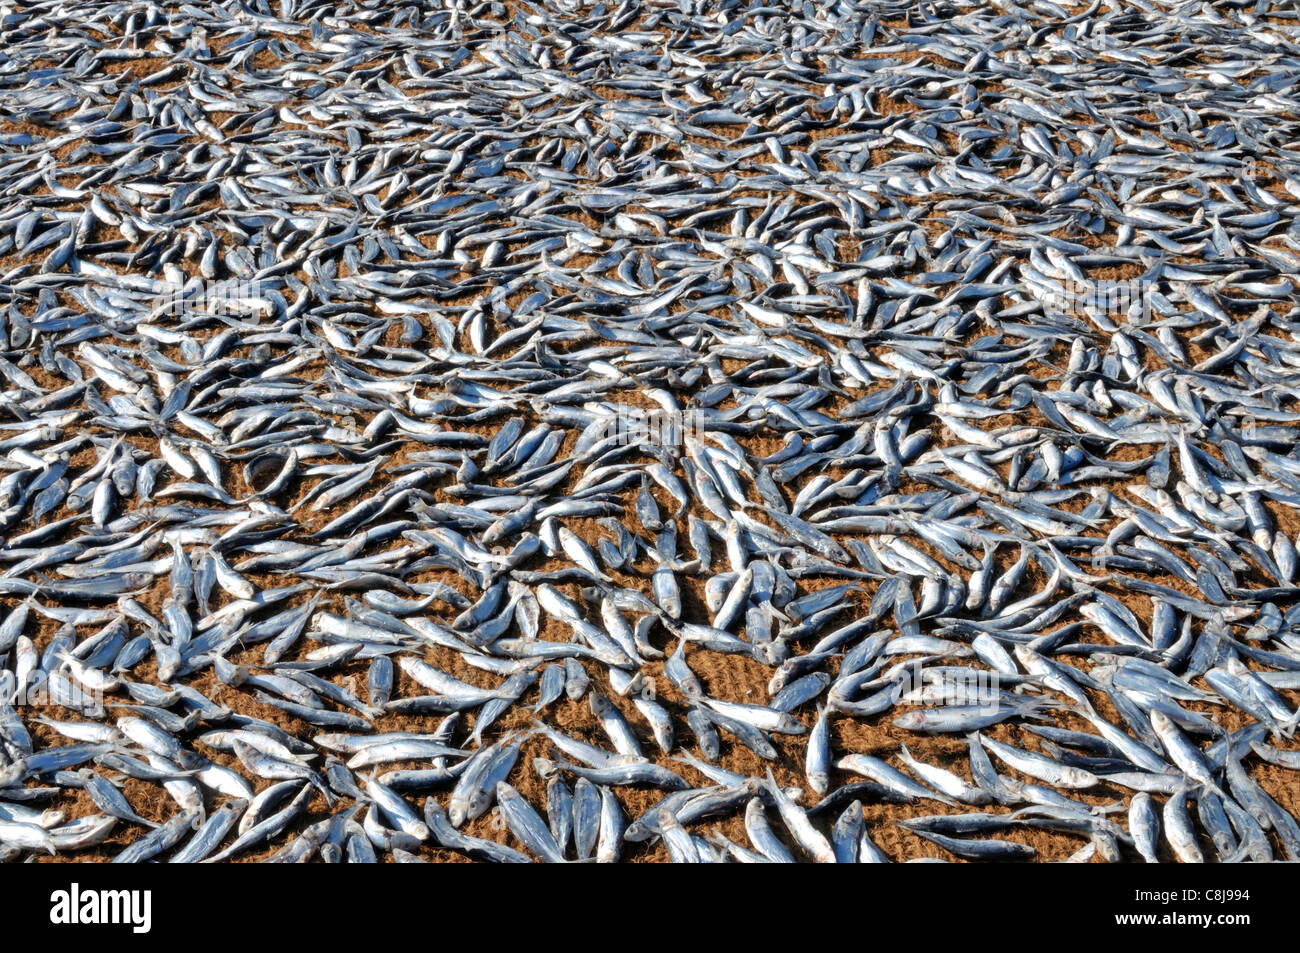 Asia, laid out, fish, fishing, fishery, fishing, catches, clip fish, coconut mats, Negombo, stockfish, beach, seashore, South As Stock Photo